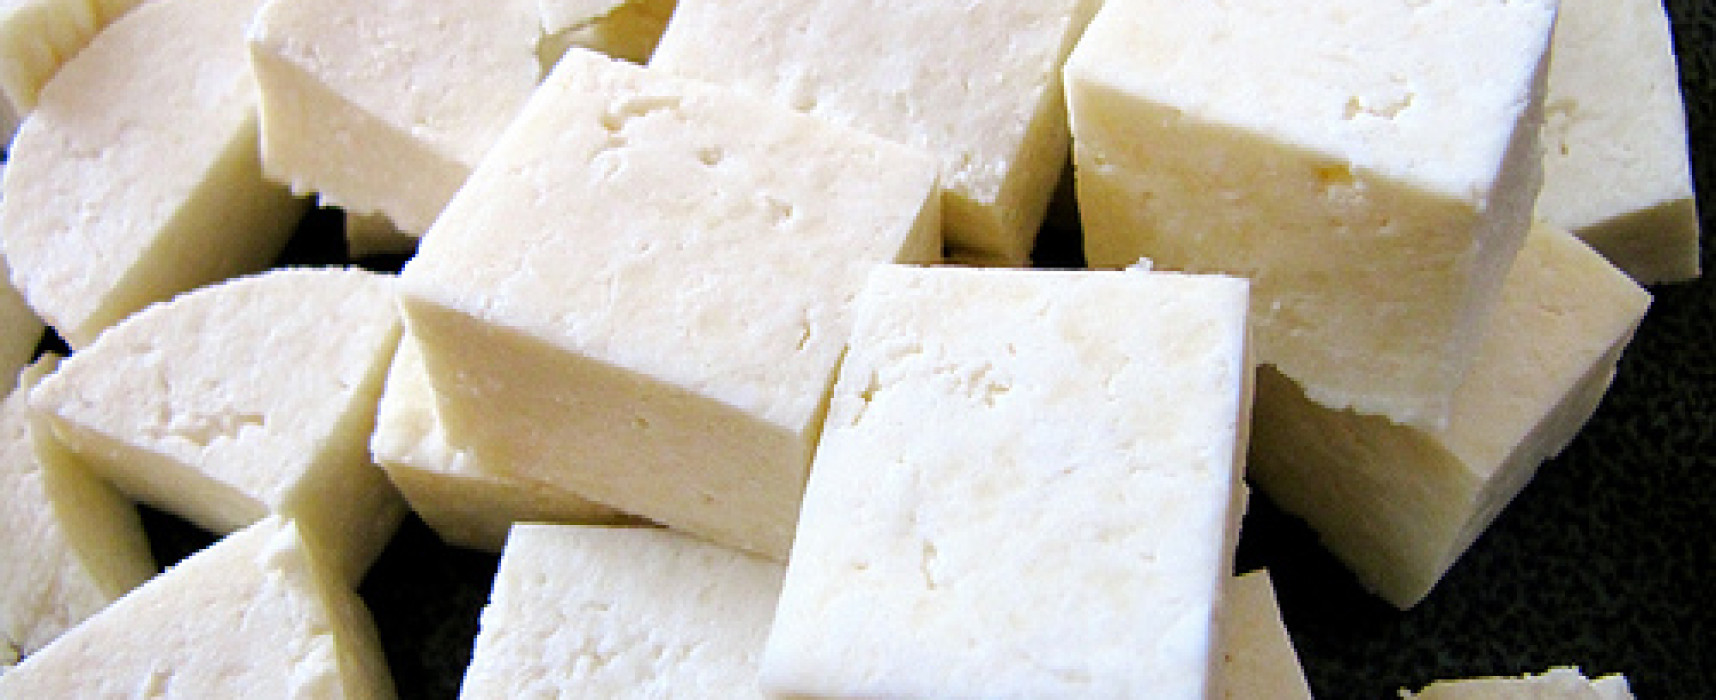 Paneer: The Indian Cheese